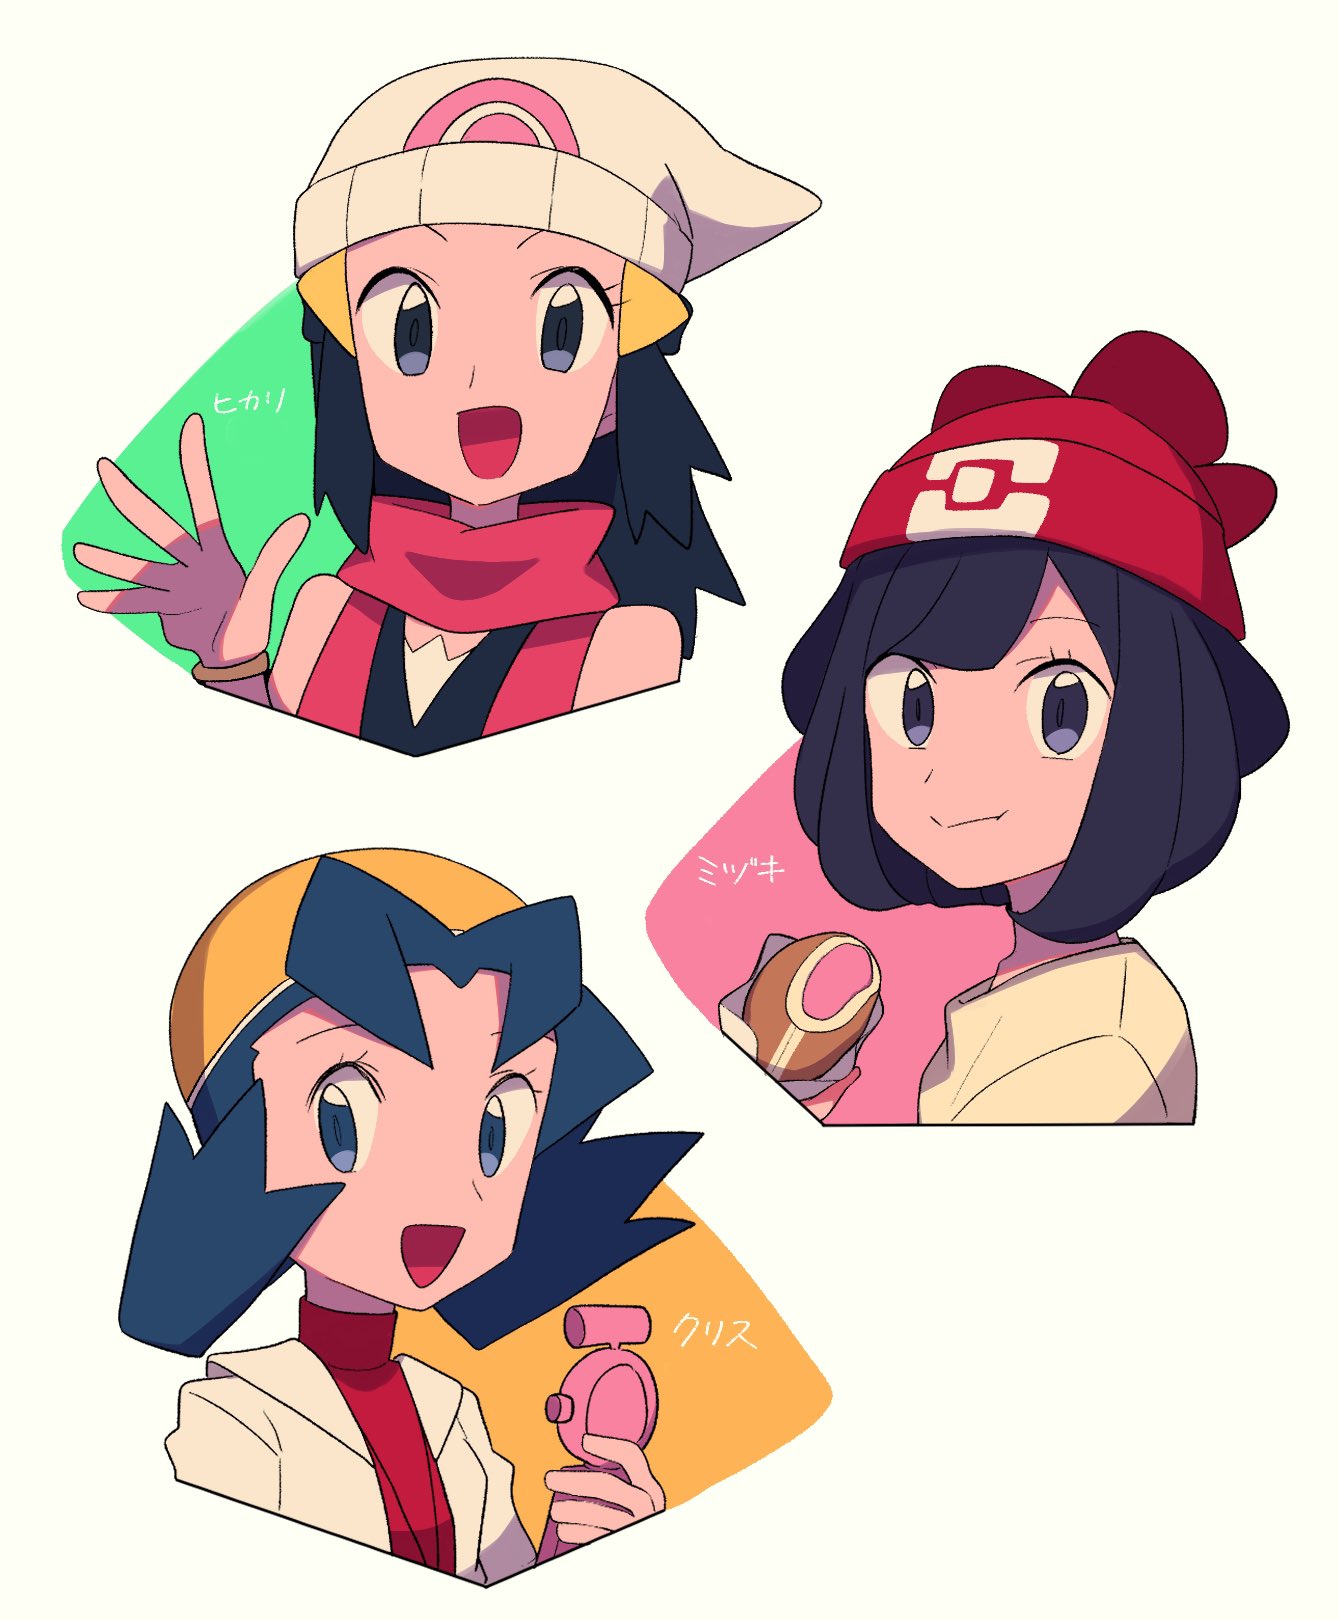 3girls :d bangs beanie black_hair black_shirt bracelet character_name closed_mouth commentary_request eating food grey_eyes hair_ornament hairclip hand_up hat highres hikari_(pokemon) holding jacket jewelry kris_(pokemon) long_hair malasada multiple_girls open_mouth parted_bangs poke_ball_print pokemon pokemon_(game) pokemon_dppt pokemon_gsc pokemon_sm red_headwear red_shirt selene_(pokemon) shirt short_hair sleeveless sleeveless_shirt smile spread_fingers tongue tyako_089 white_headwear white_jacket yellow_headwear